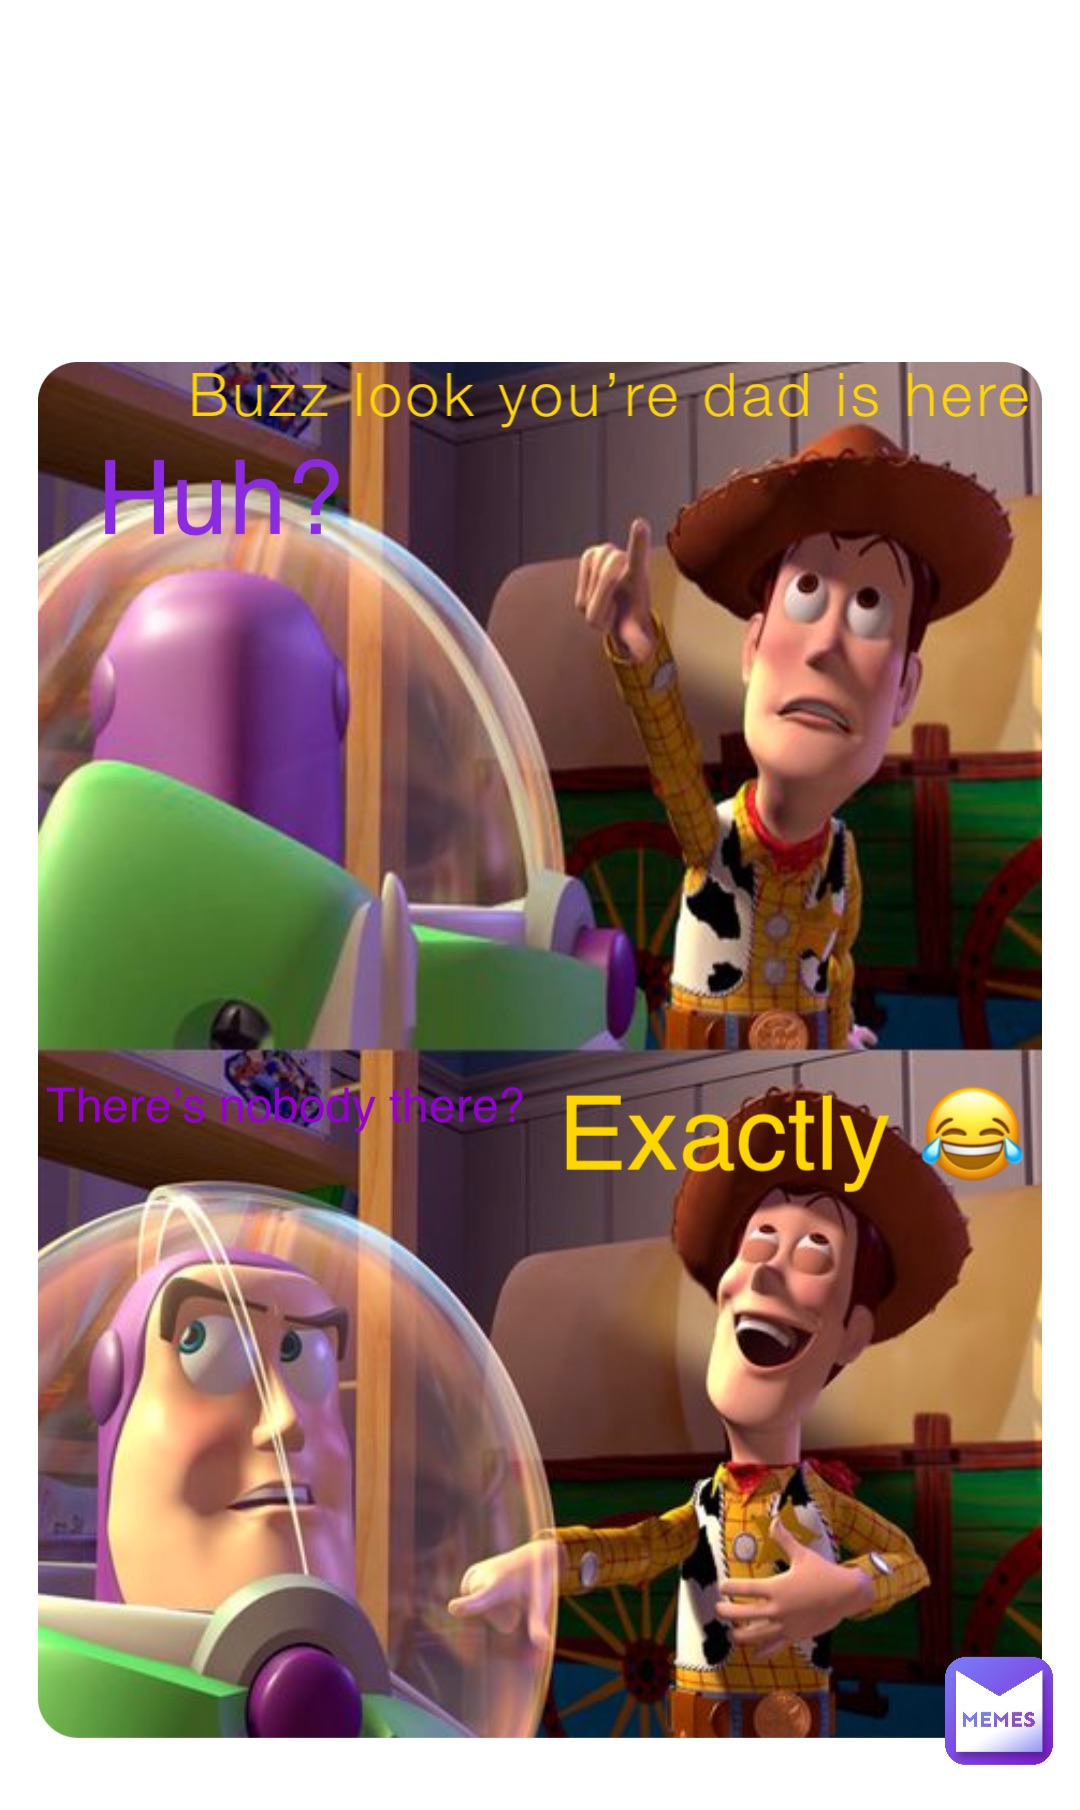 Buzz look you’re dad is here Huh? There’s nobody there? Exactly 😂